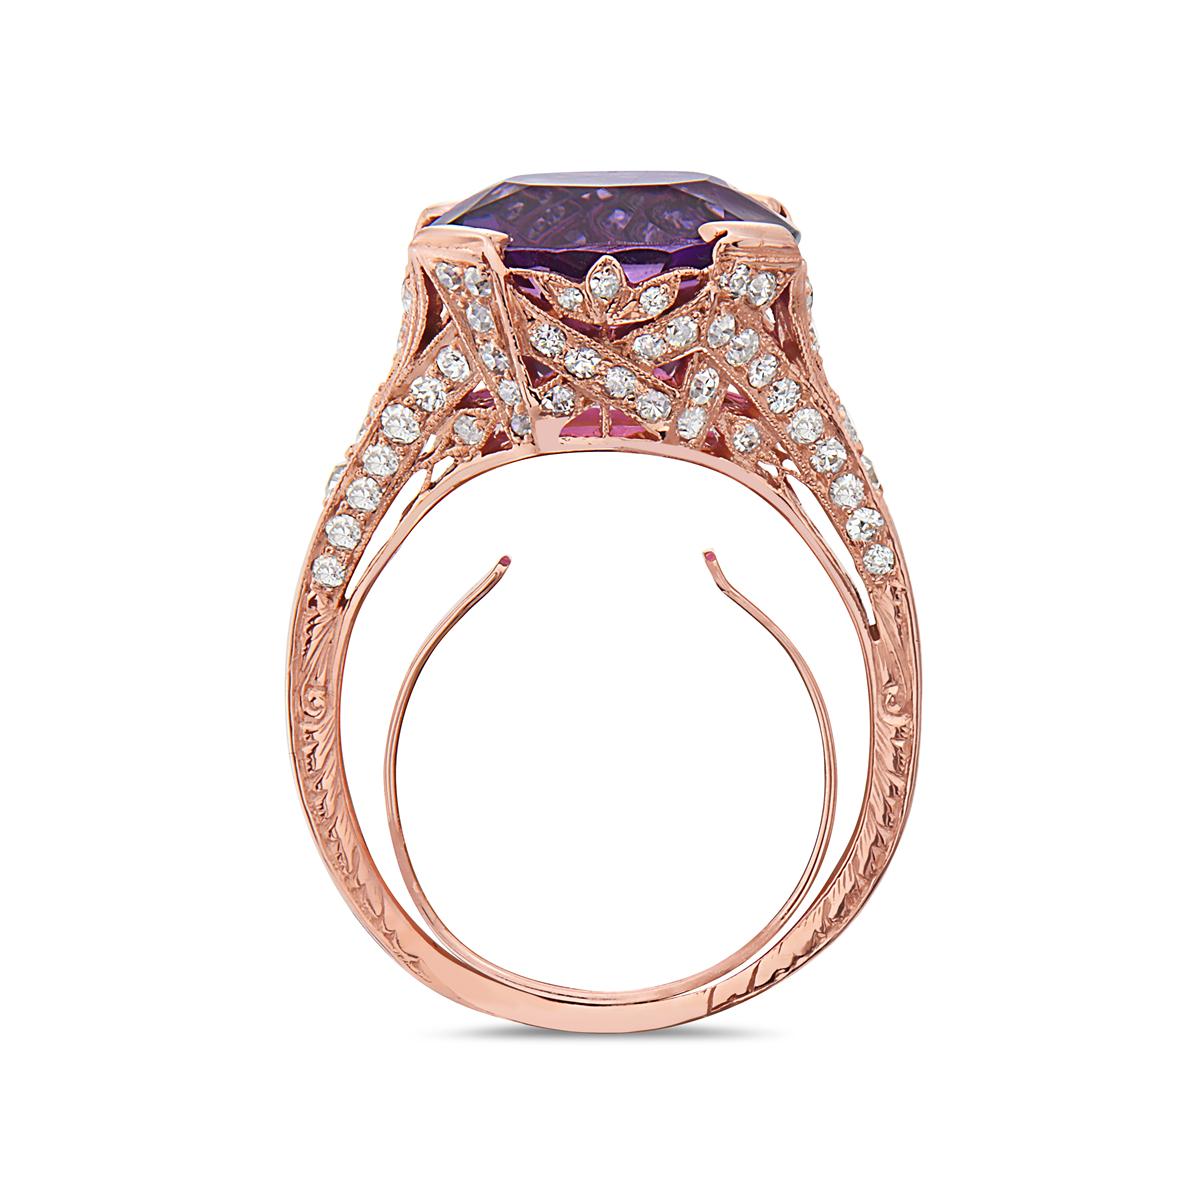 This standout engagement ring features a 6.82 carat amethyst stone set in rose gold filigree surrounded by diamonds. Adjustable sizing. Made in USA.
Viewings available in our NYC showroom. 